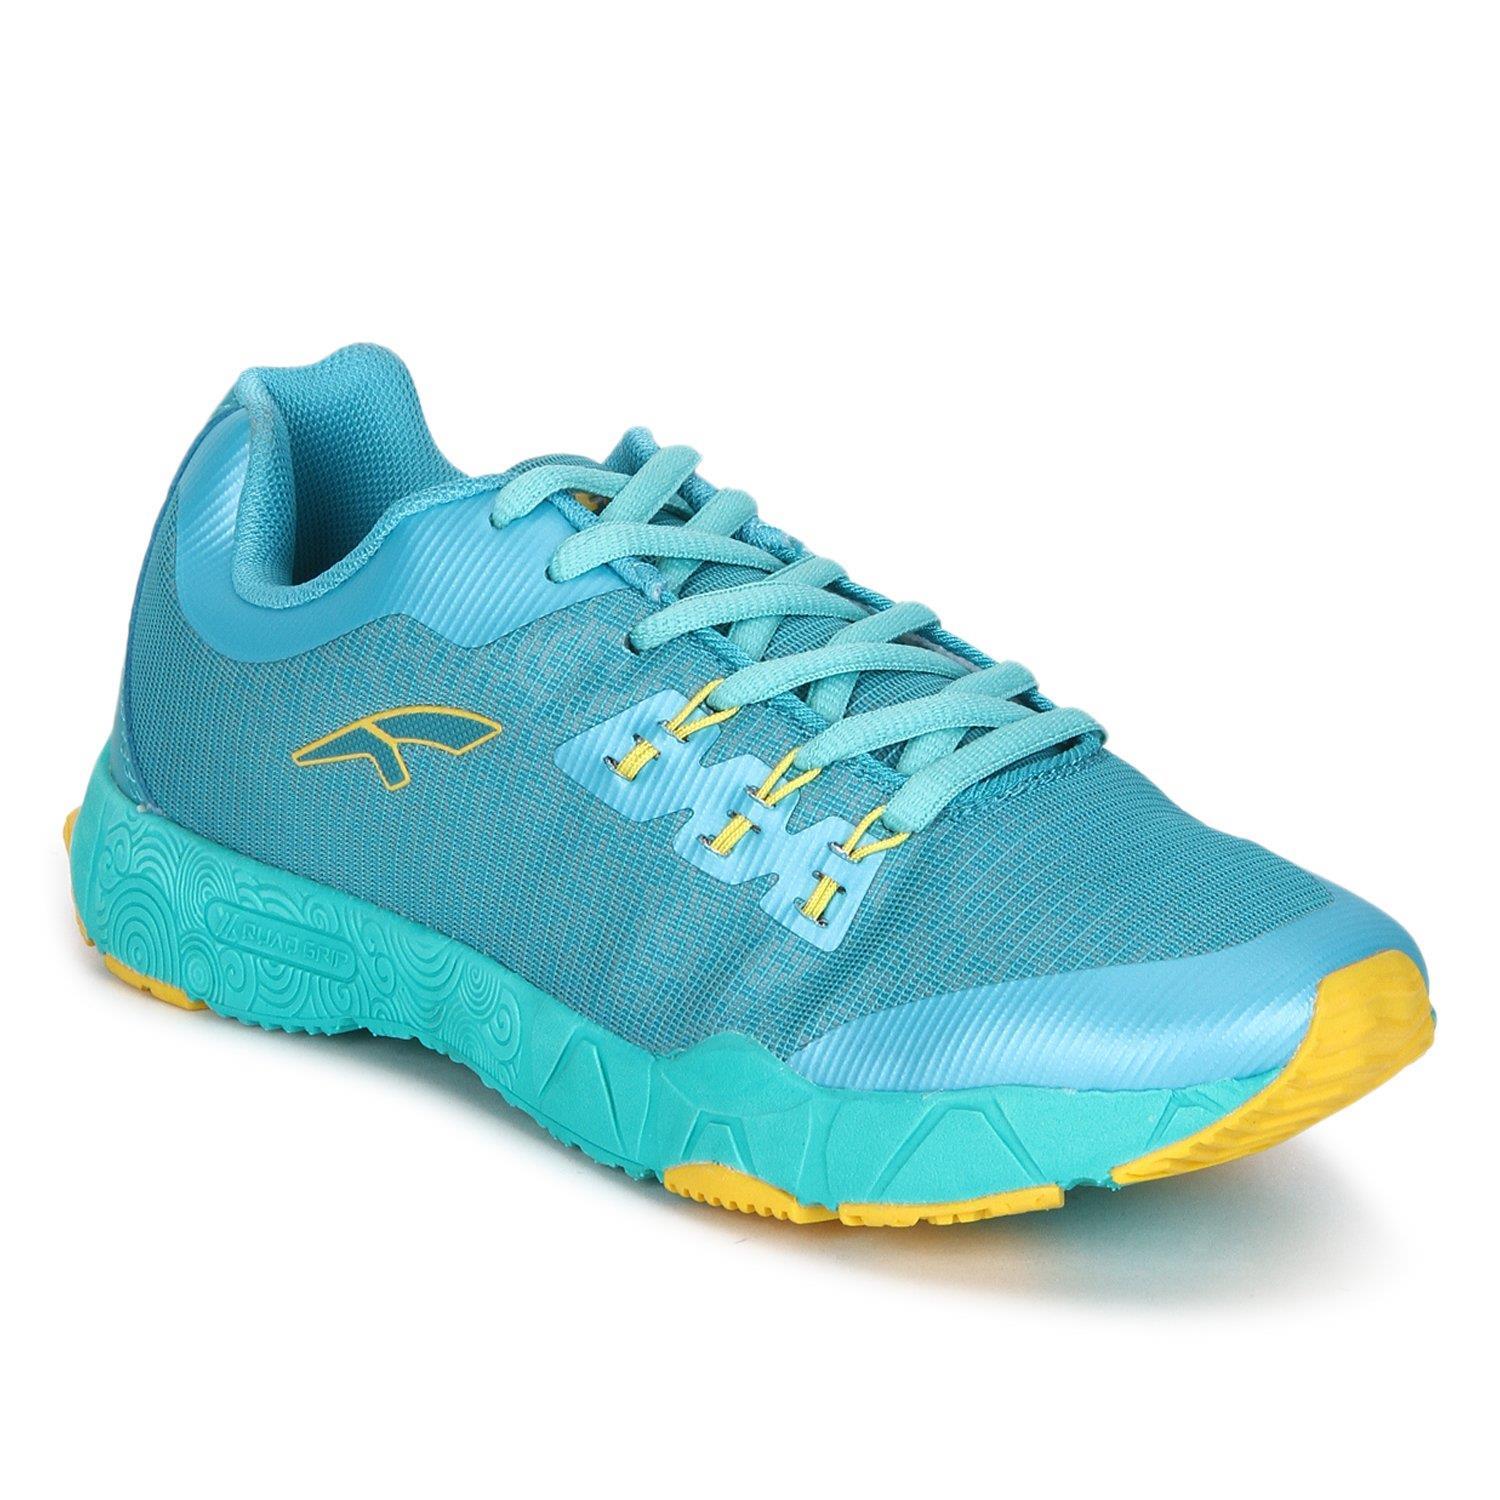 Affordable Men's Running Shoes Online - R1006 757 Grey | Furo Sports